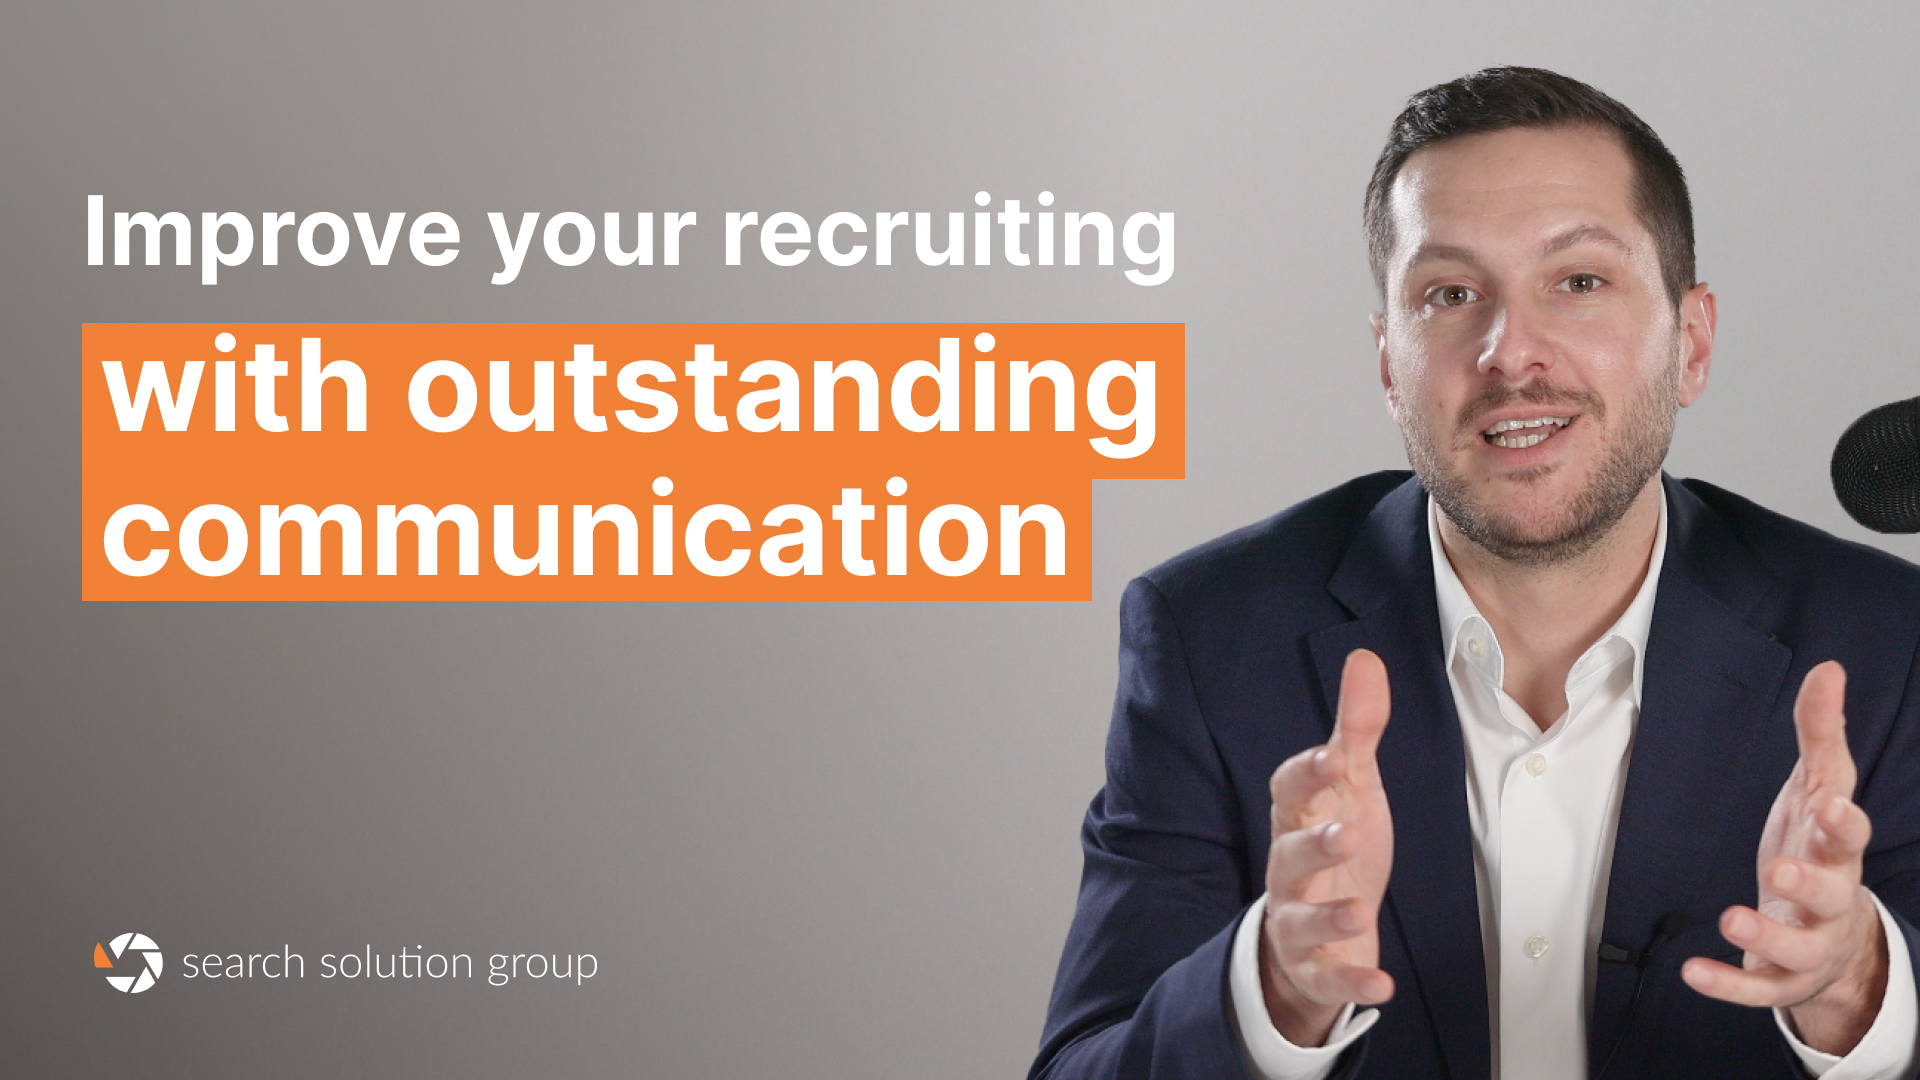 Director of Marketing Greg Moores talks about how to best communicate when recruiting.